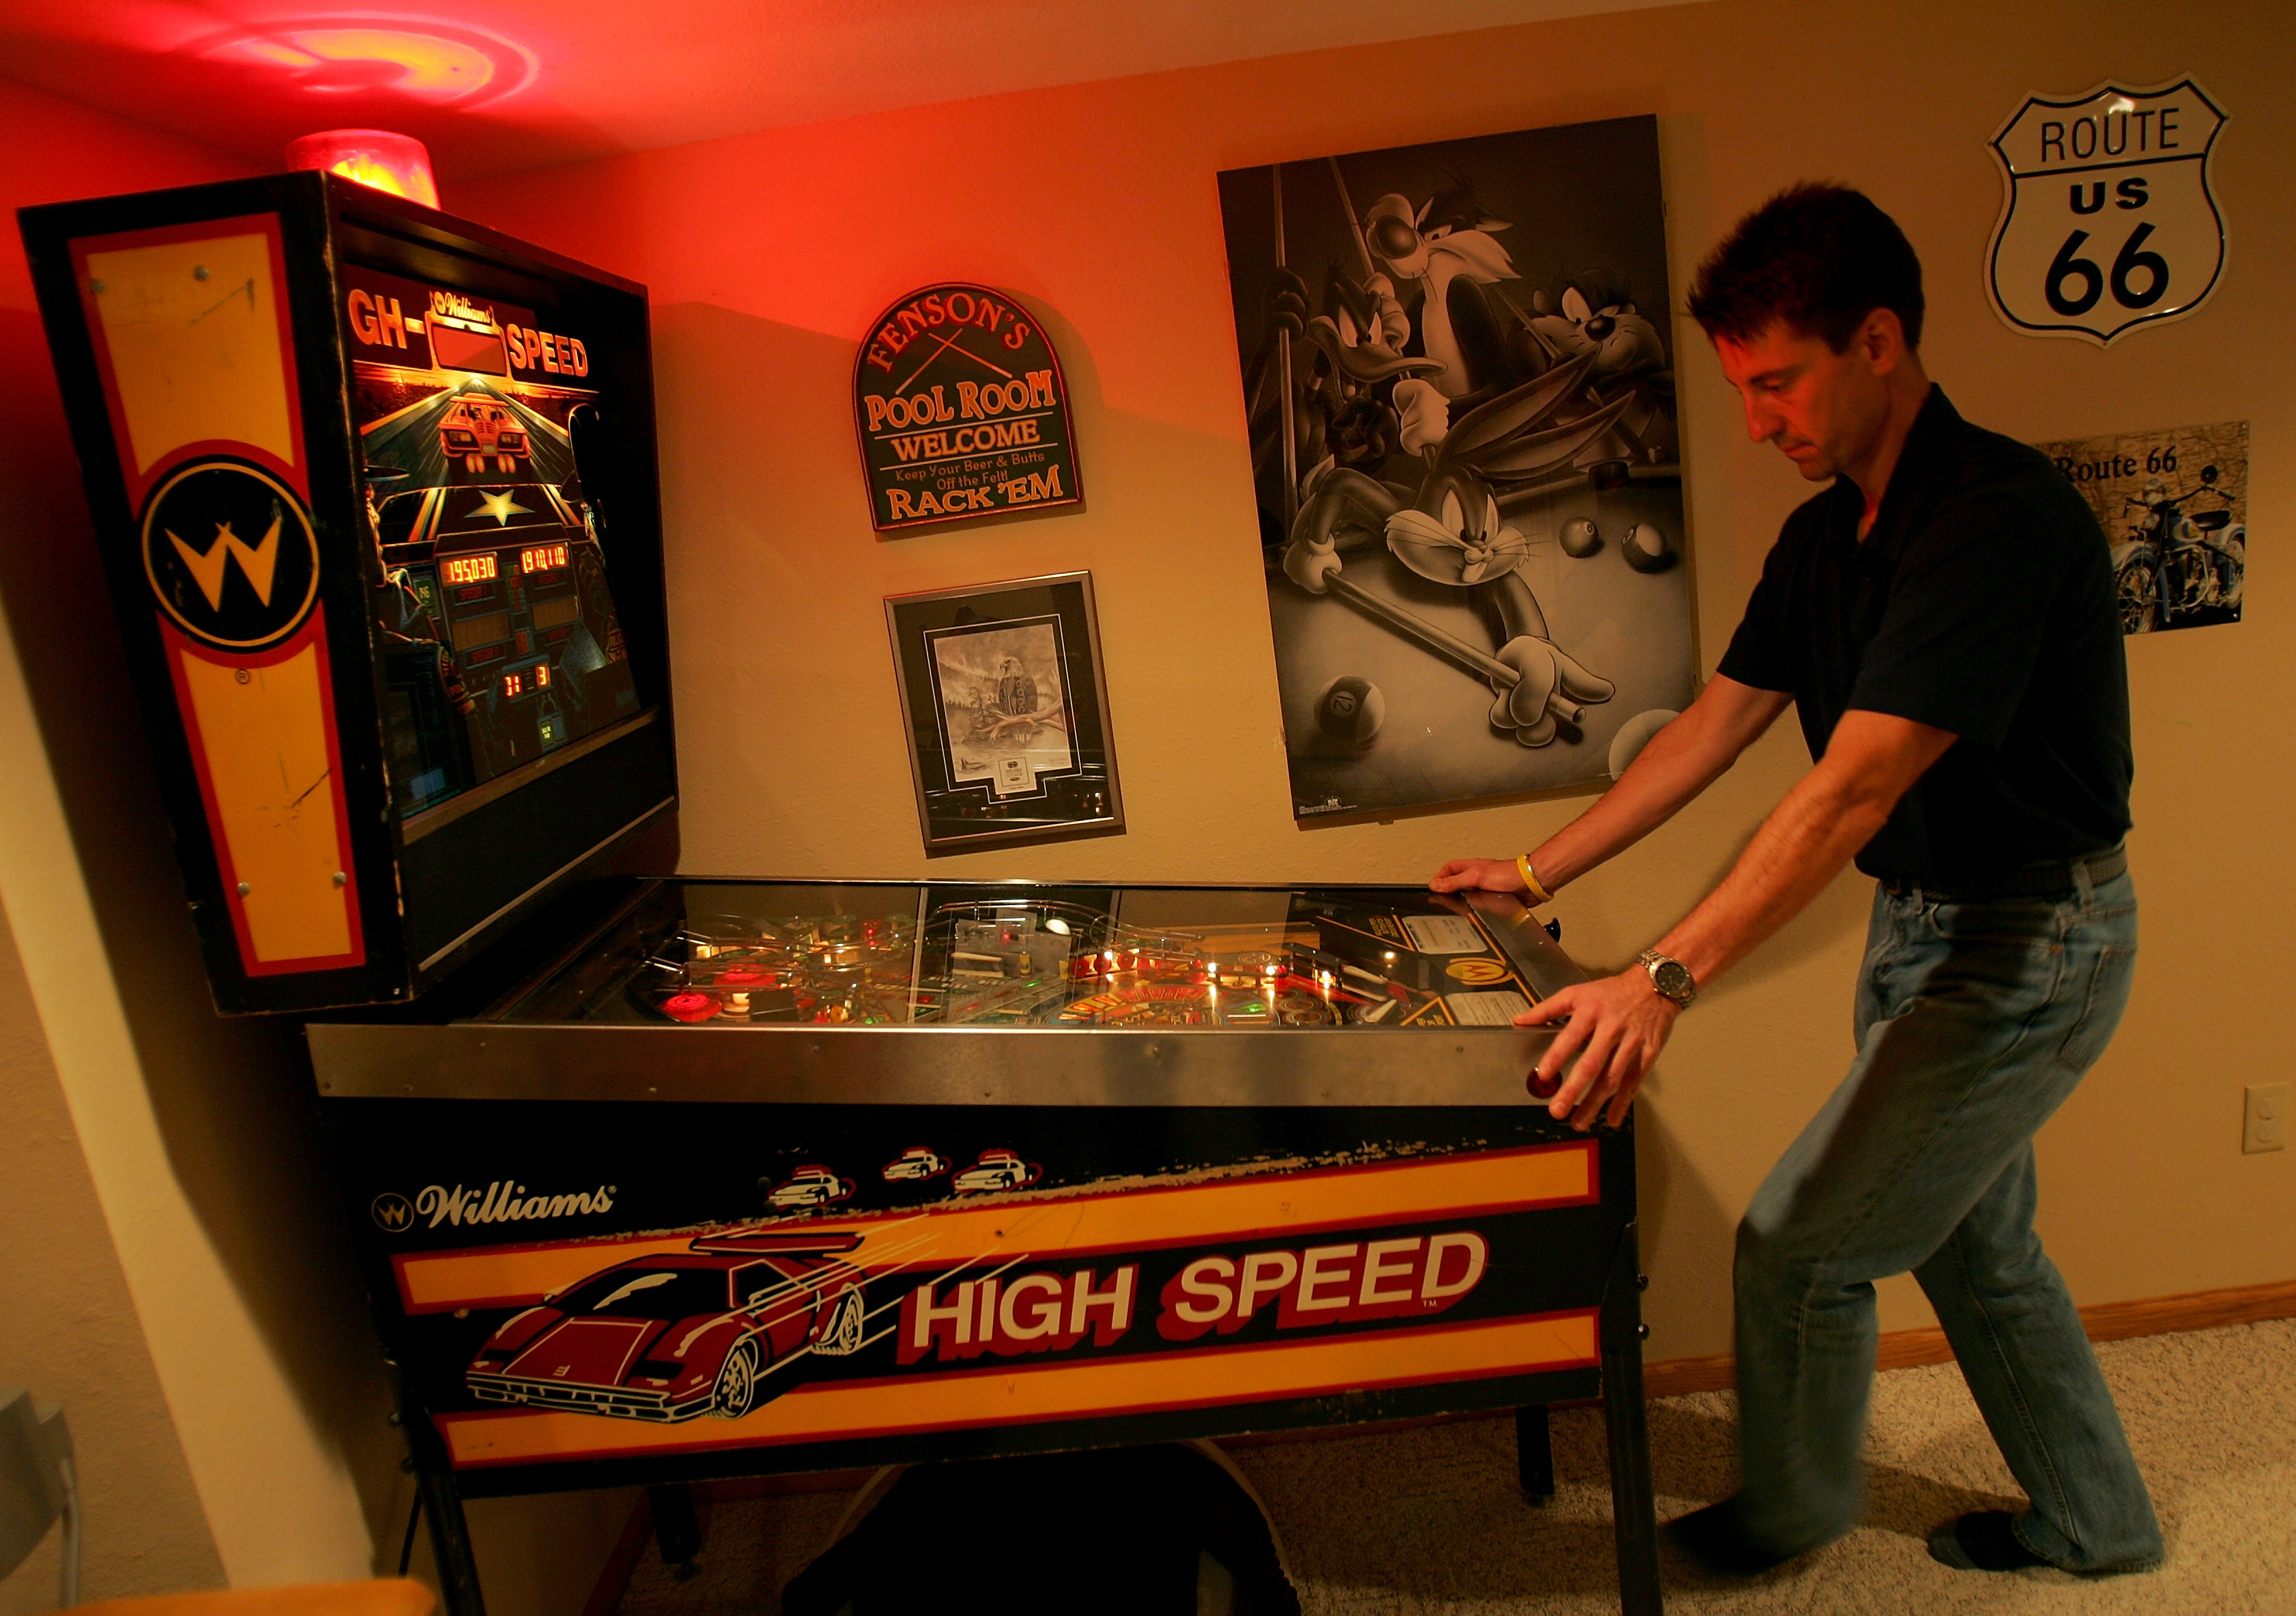 BEMIDJI, MN - SEPTEMBER 28:  Pete Fenson plays pinball in his basement September 28, 2005 in Bemidji, Minnesota. Pete Fenson is a curler and will represent the US at the Olympic games in Torino. (Photo by Matthew Stockman/Getty Images)